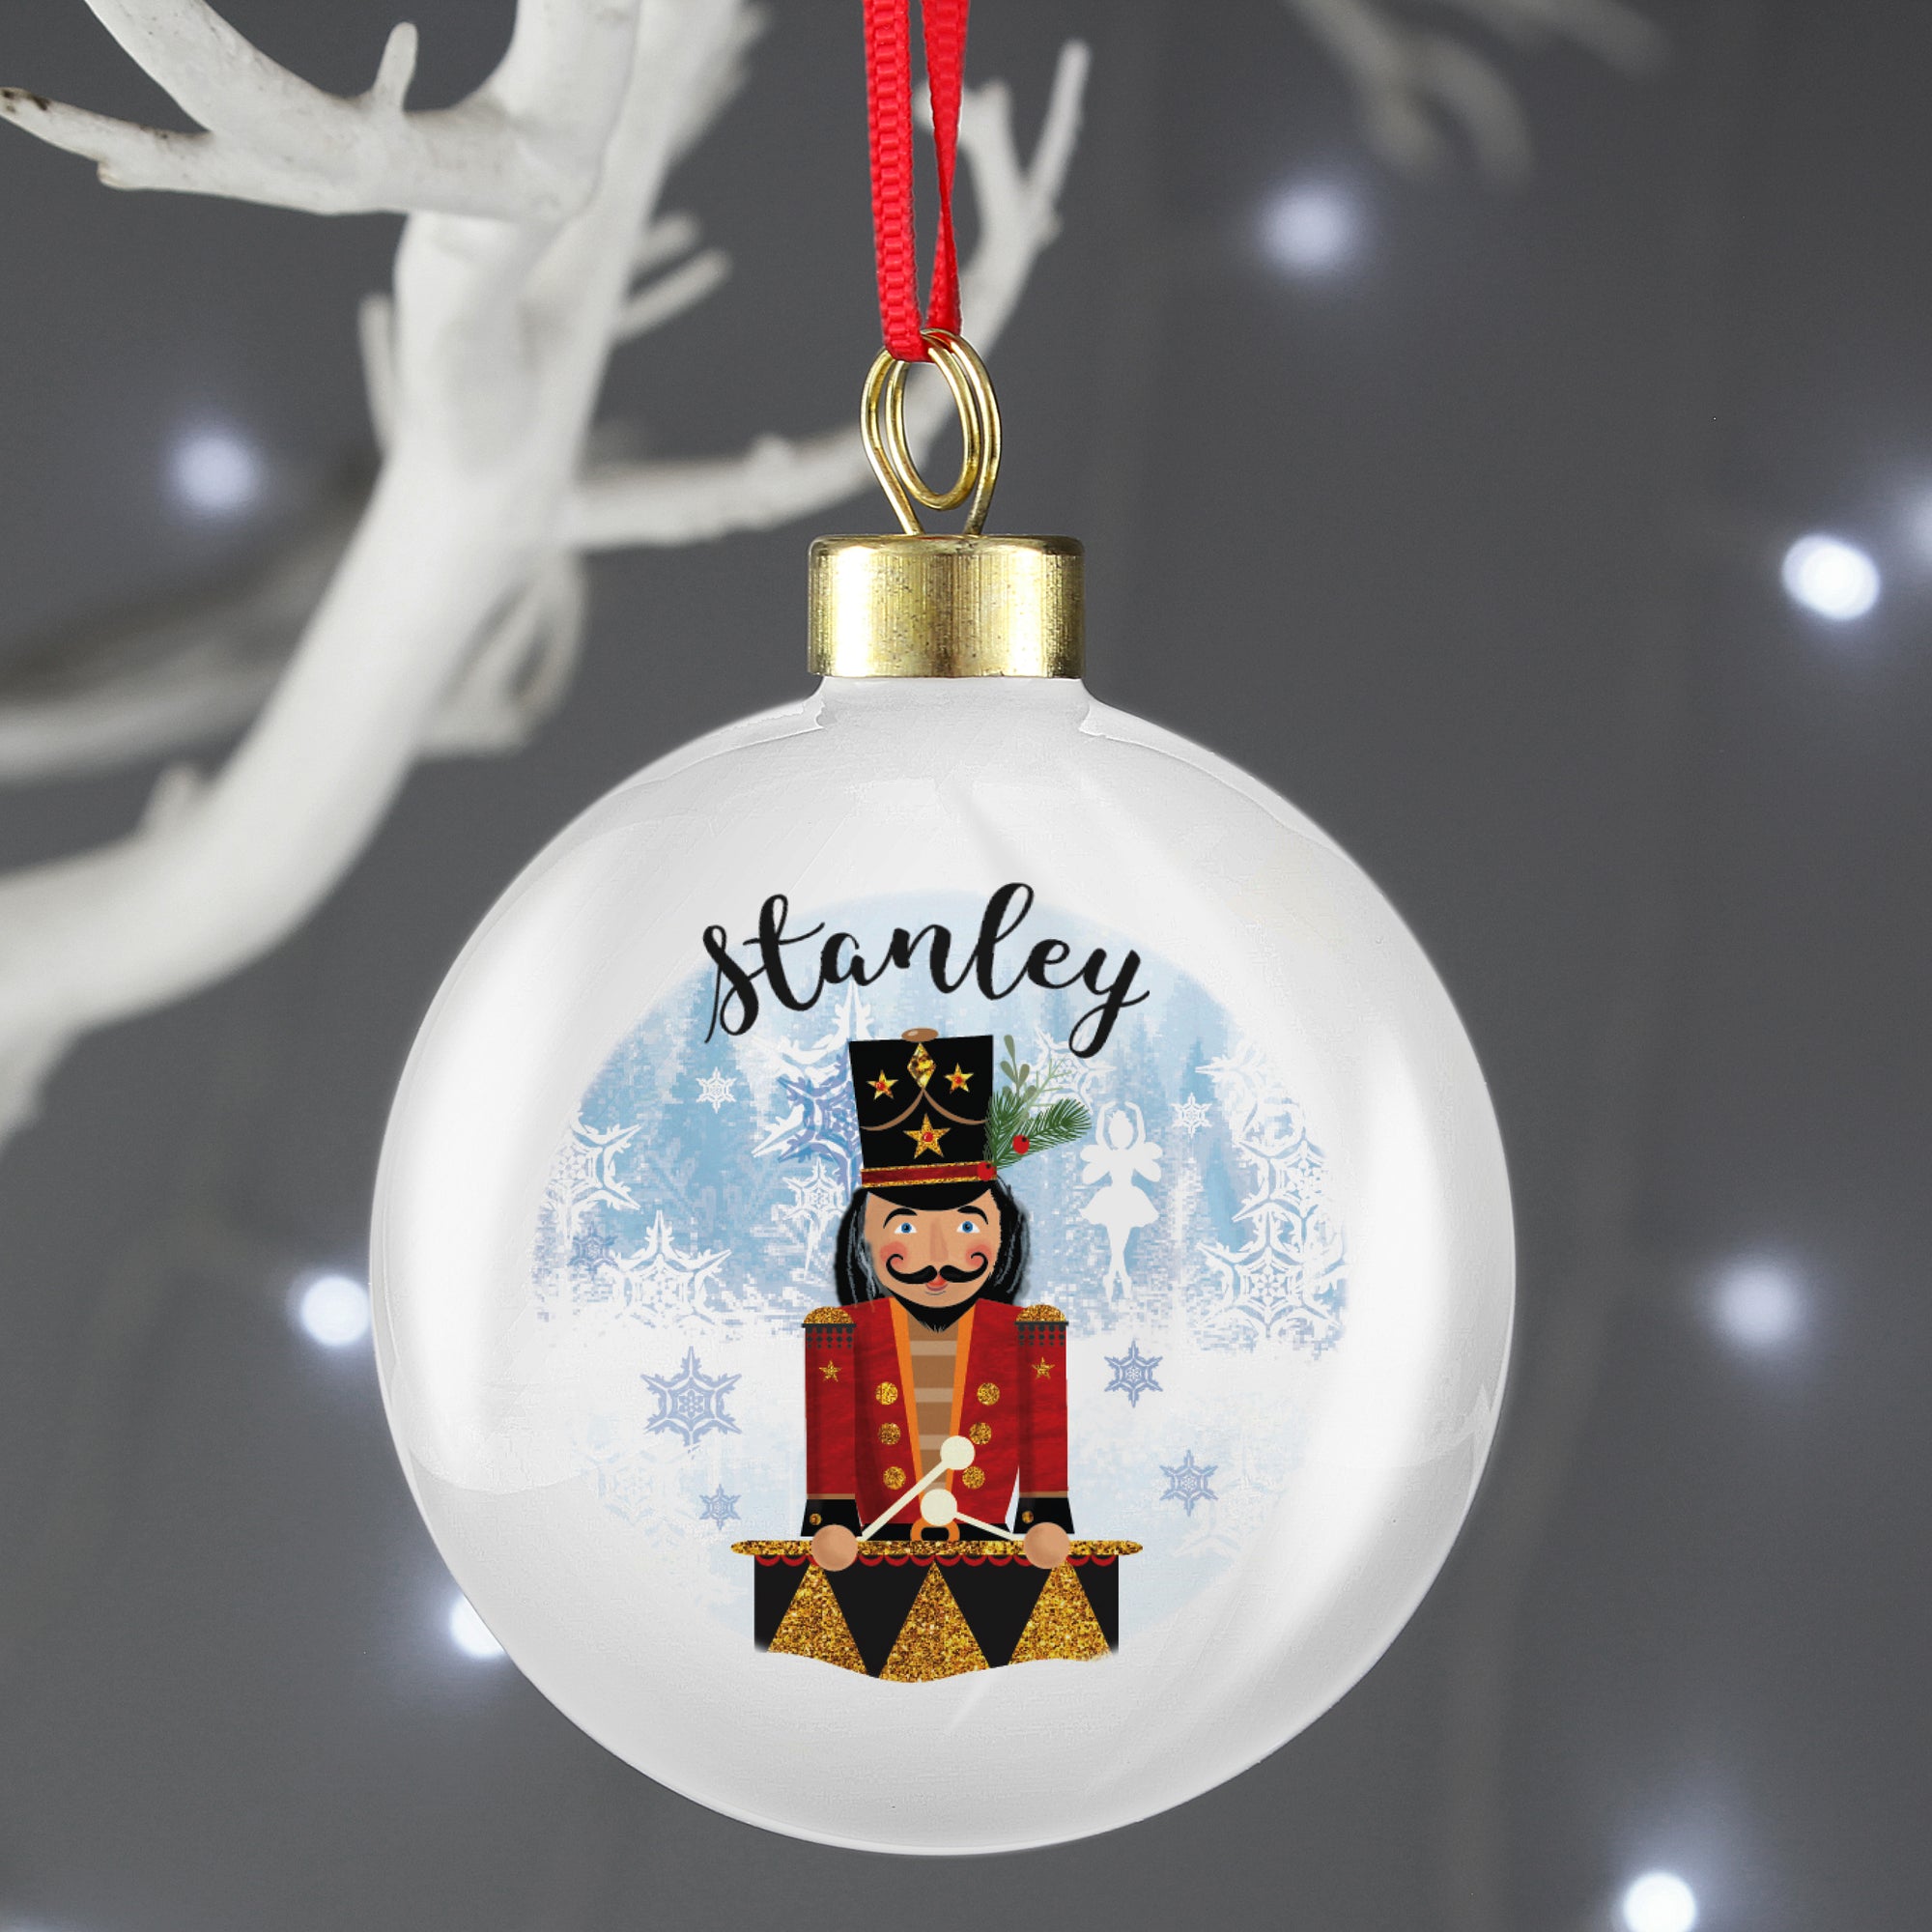 Personalised Christmas bauble featuring an image of a hand drawn wooden nutcracker toy with a drum. A name of your choice will be printed above the image in a black modern cursive font. The rear of the bauble can be personalised with your own special message over up to 4 lines. The bauble comes ready to hang with a ribbon.